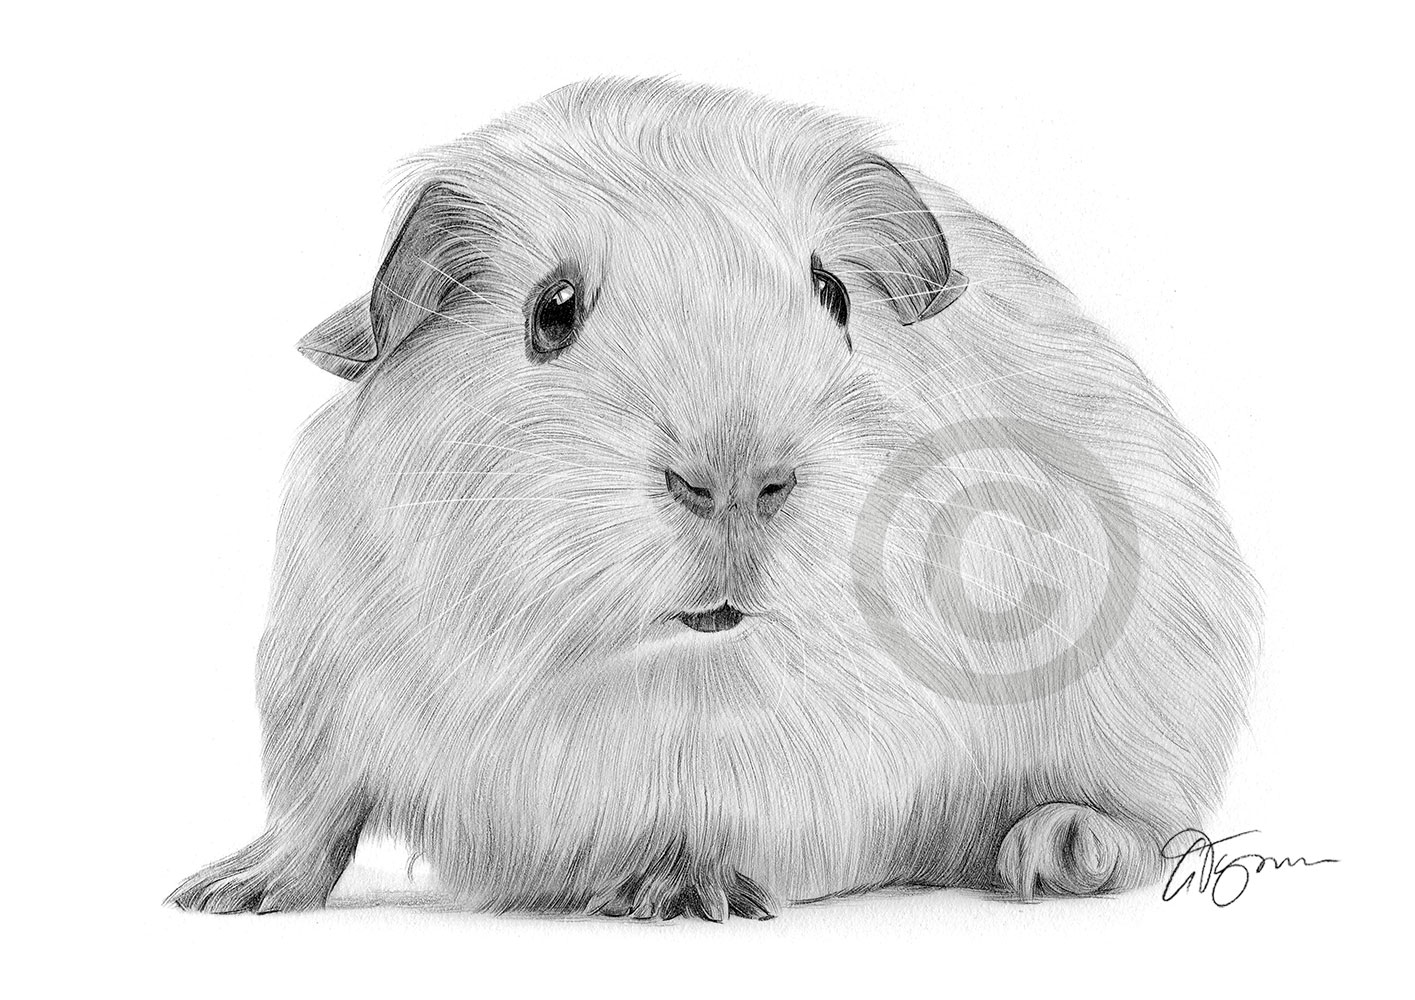 Pencil drawing of a guinea pig by artist Gary Tymon